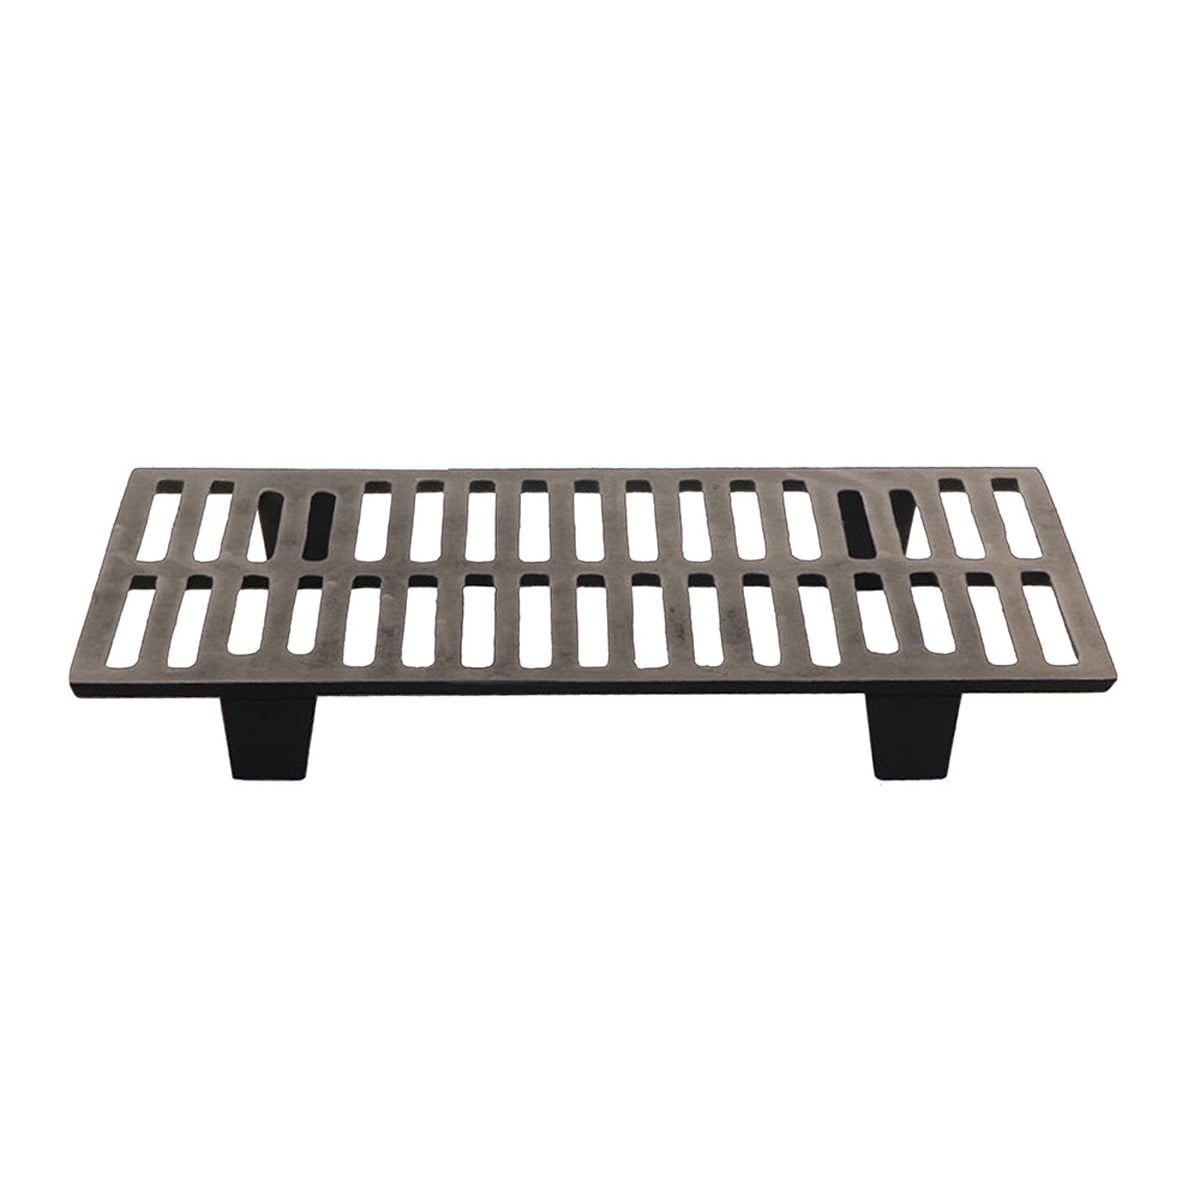 US Stove G26 Small Cast Iron Grate for Logwood by US Stove Company - 1